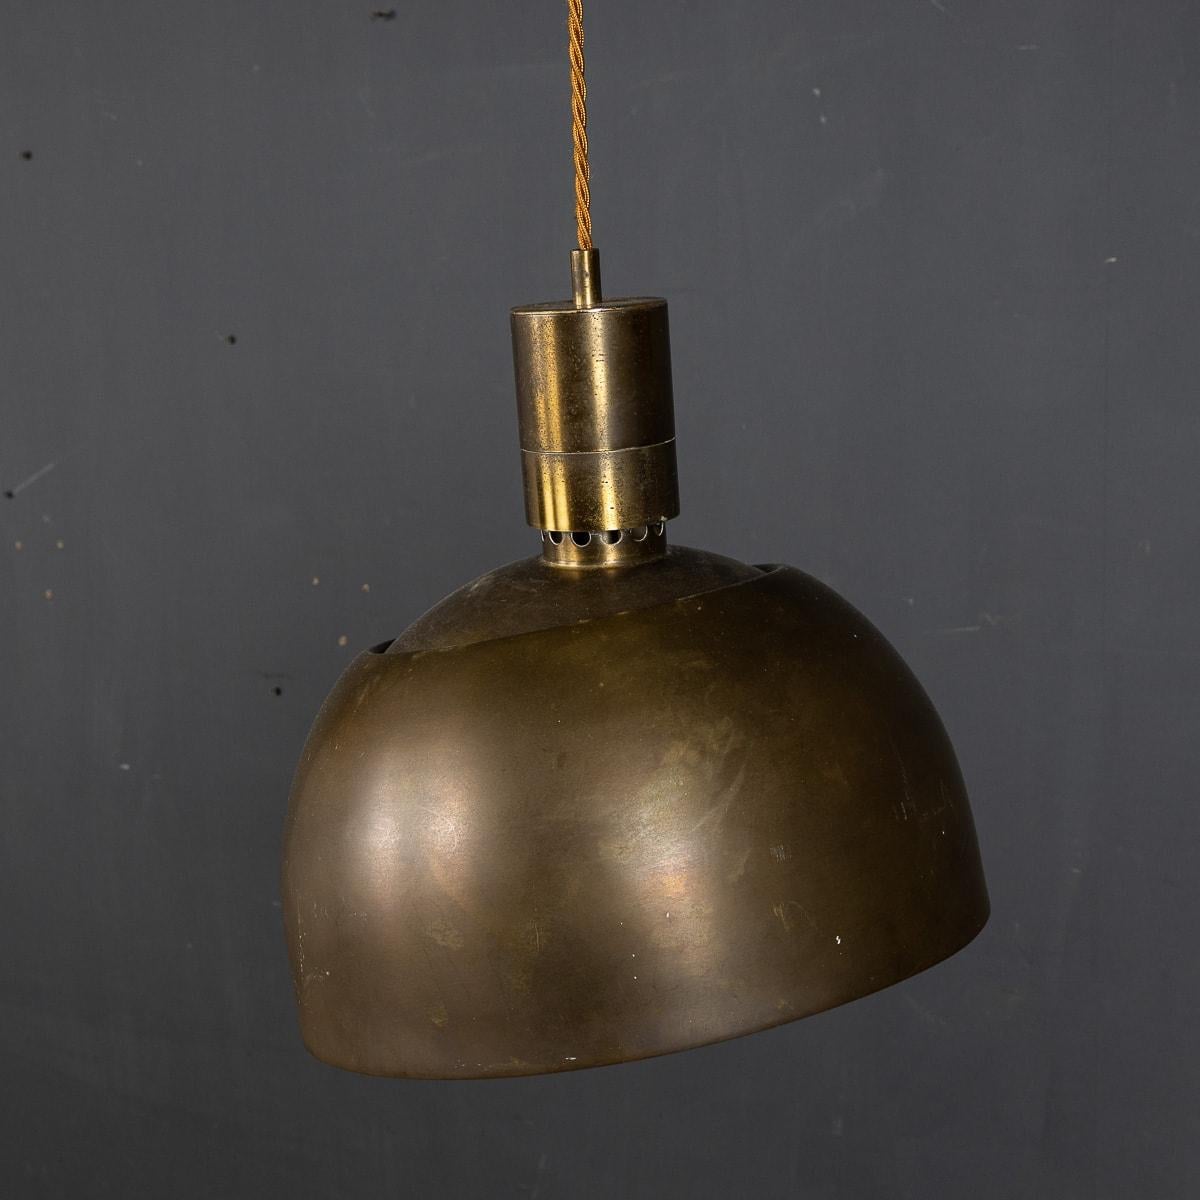 Pair of Italian Brass Articulated Wall Lights by Albini & Helg, c.1960 For Sale 3